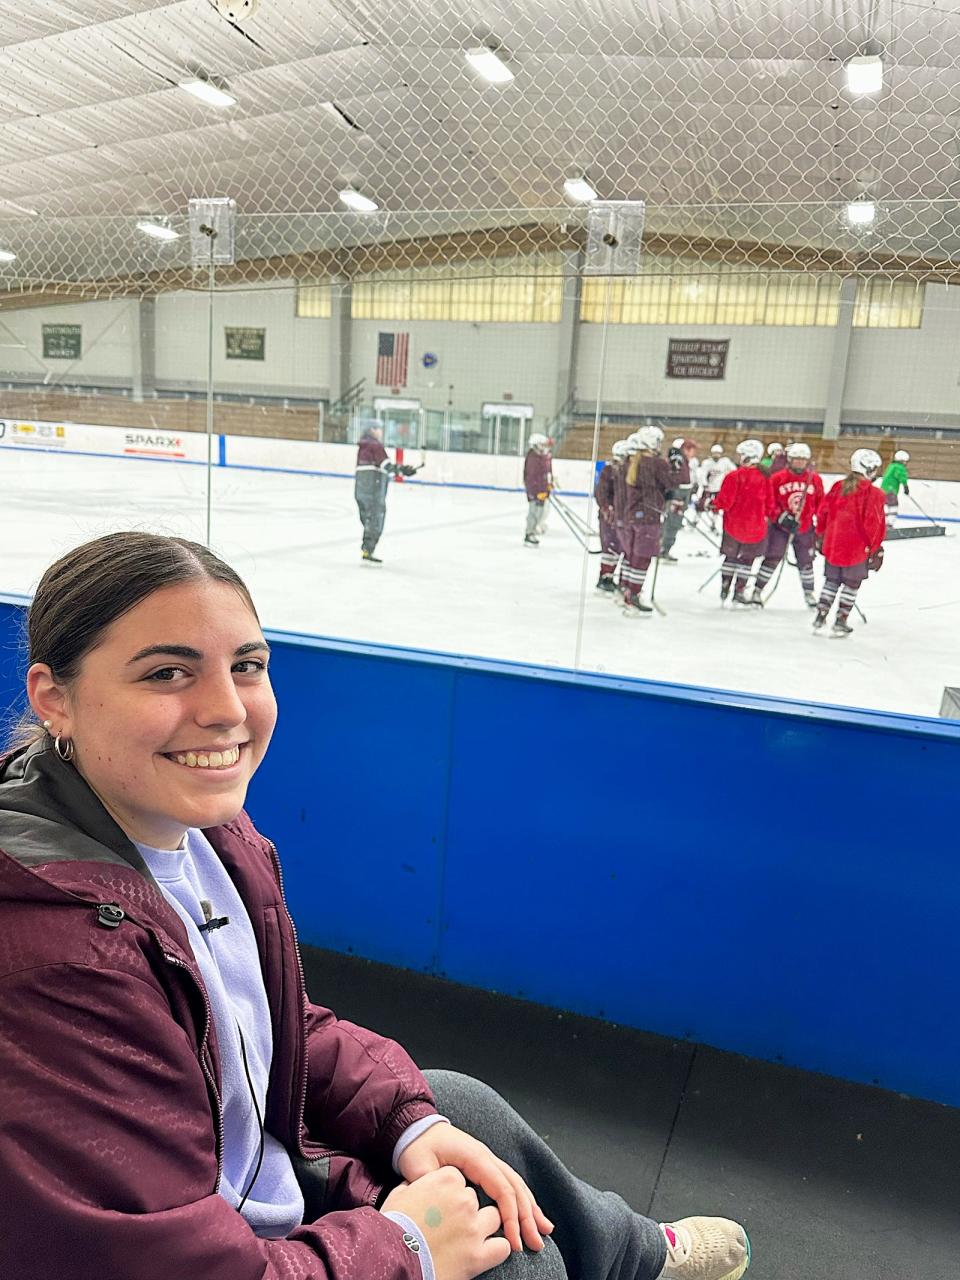 Durfee three-sport athlete and Bishop Stang ice hockey player Emily Curran watches a recent practice at Hetland Ice Arena in New Bedford.